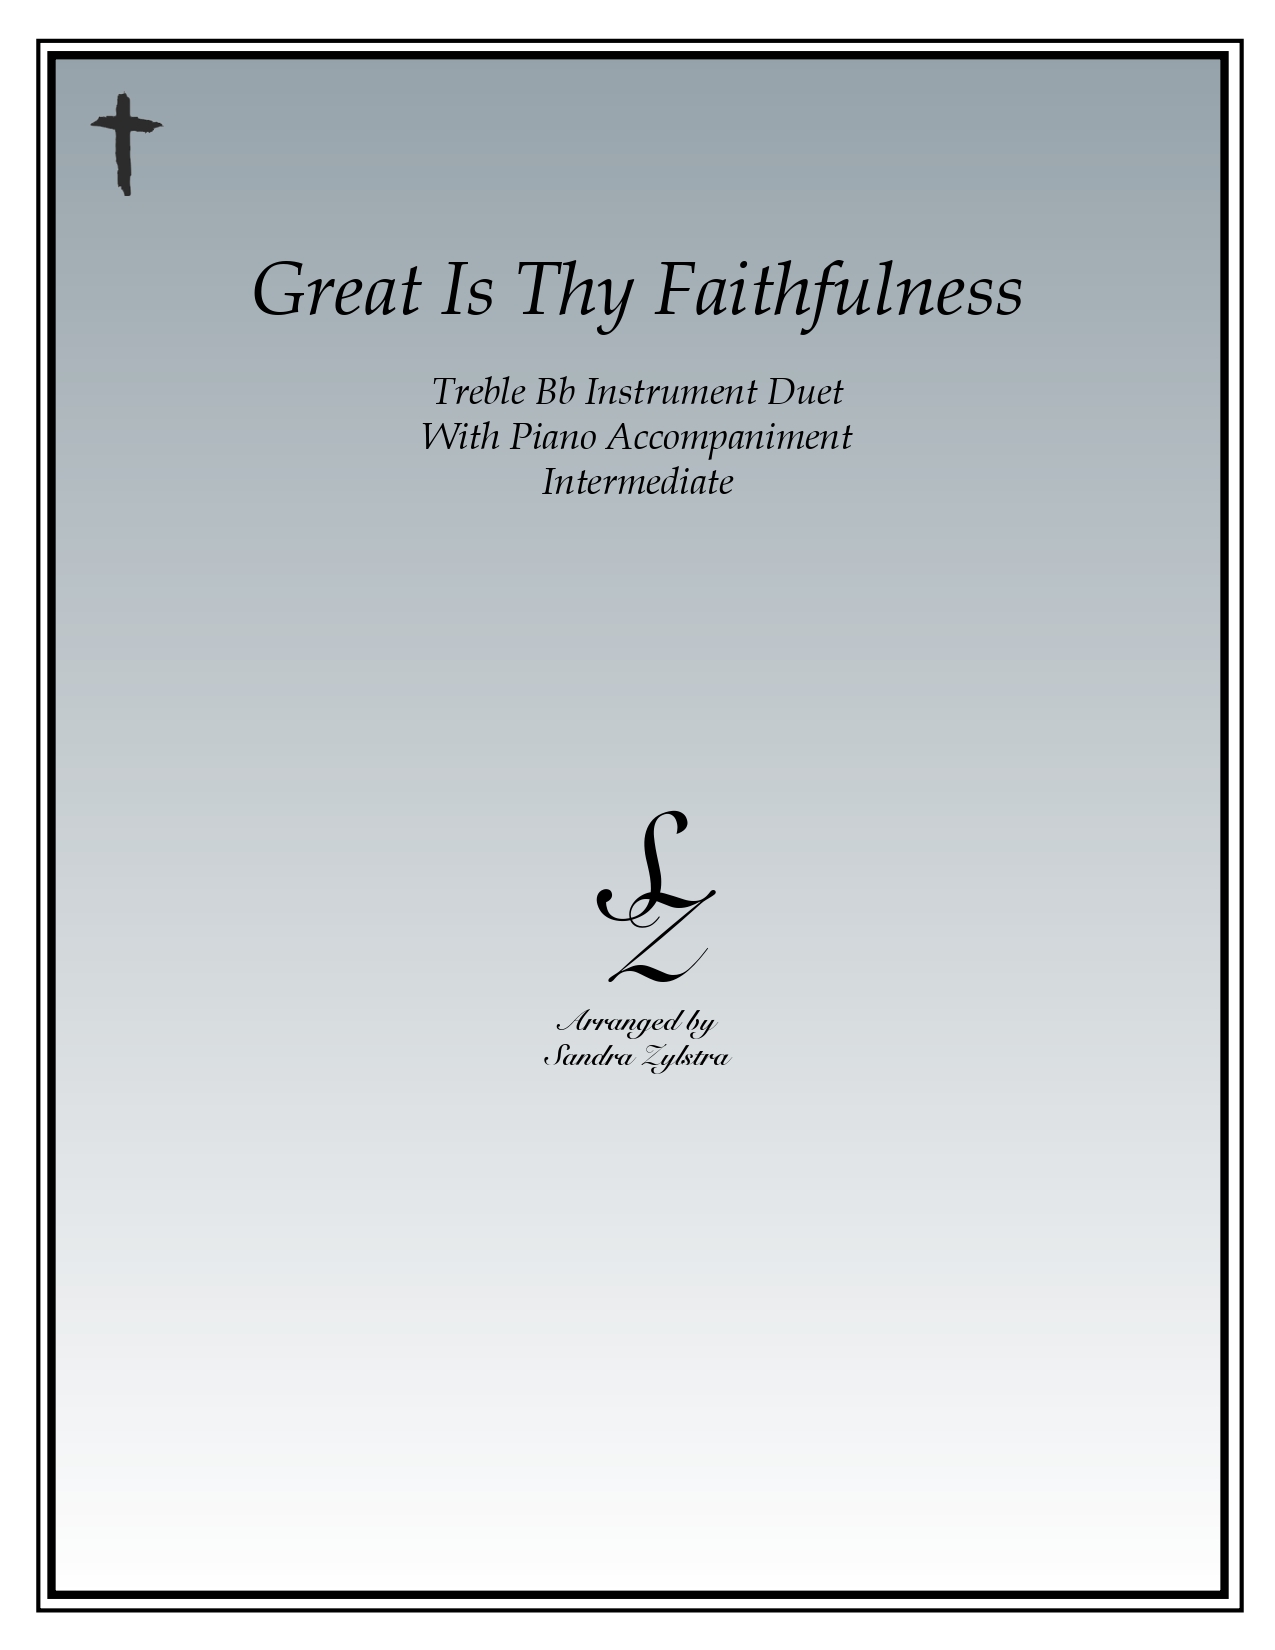 Great Is Thy Faithfulness Bb instrument duet parts cover page 00011